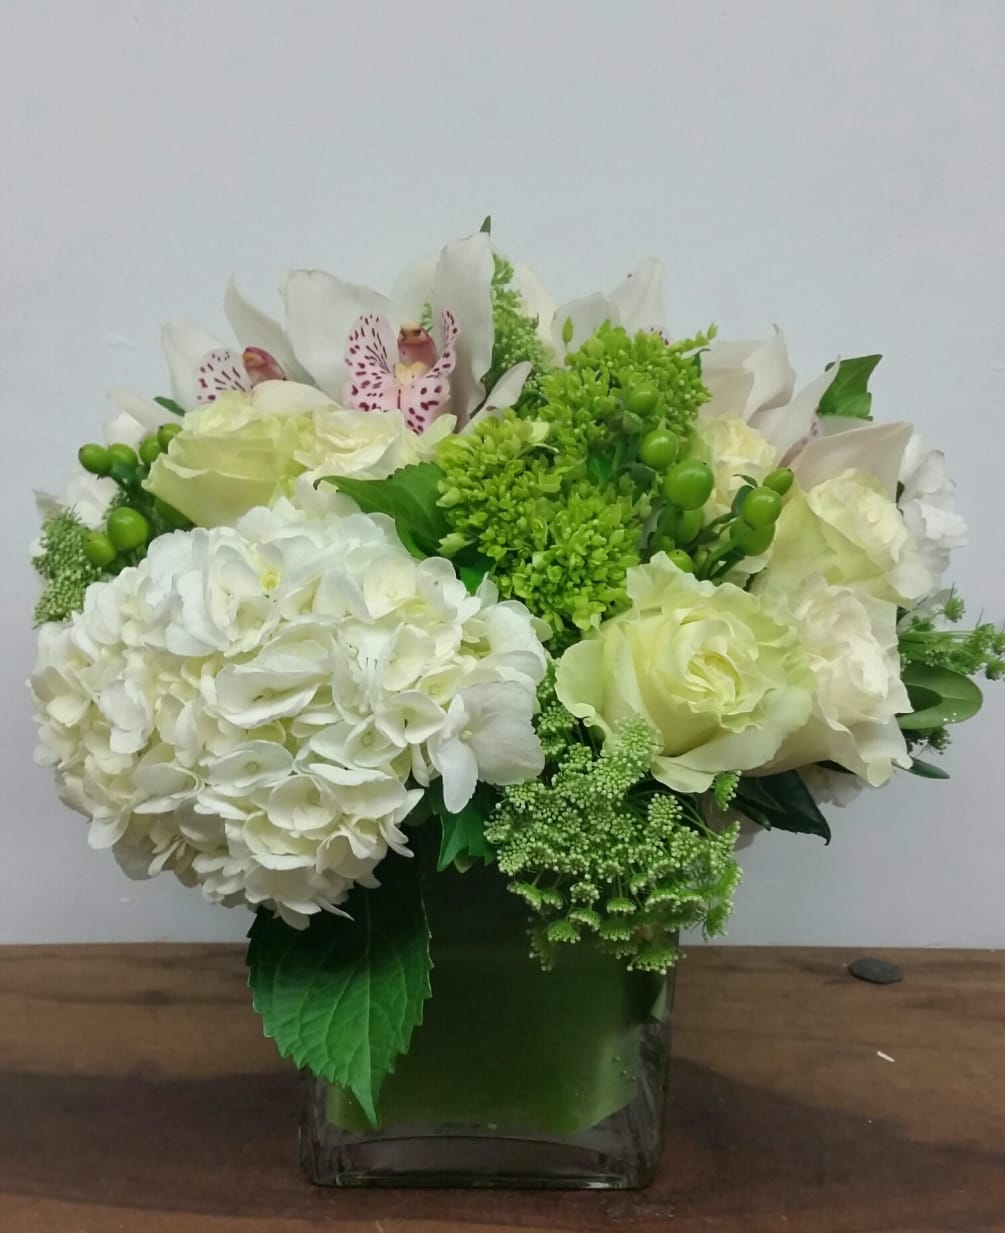 A luscious arrangement featuring cloud-like hydrangea, roses and cymbidium orchids in a